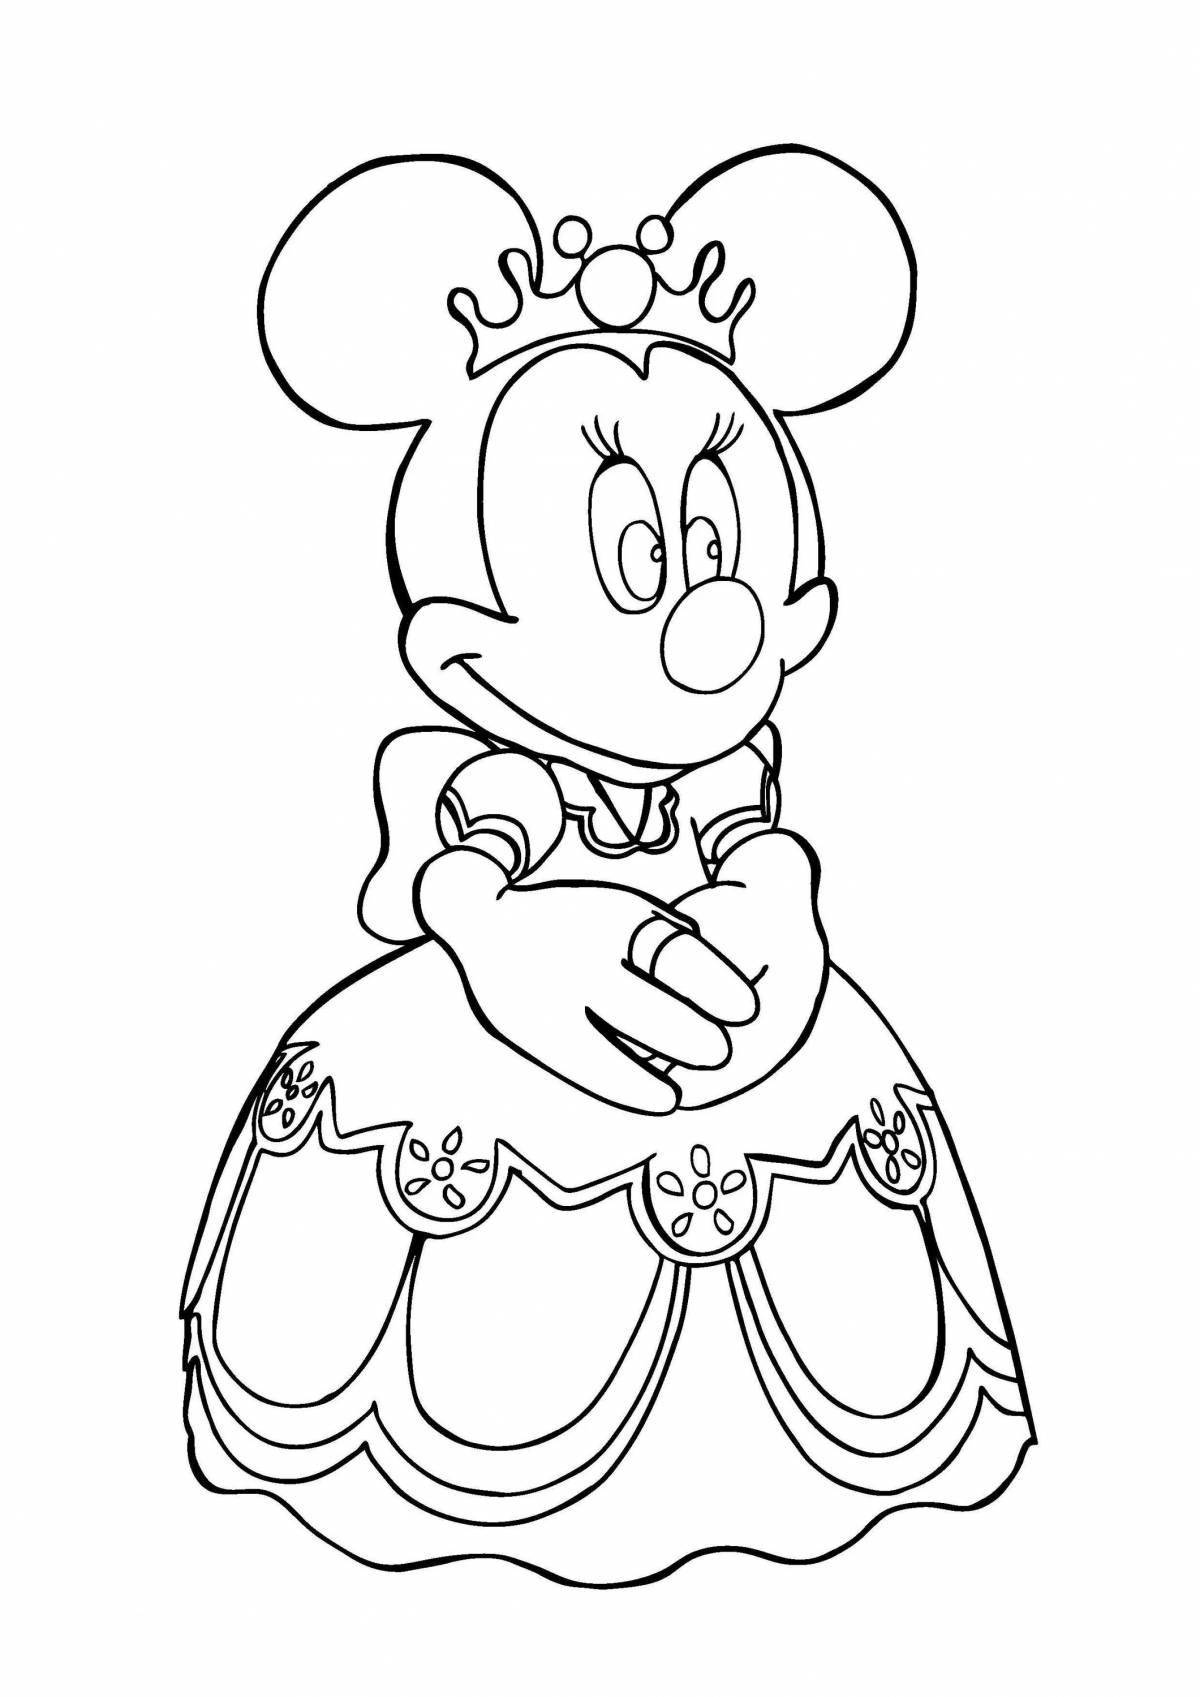 Coloring book glittering minnie mouse